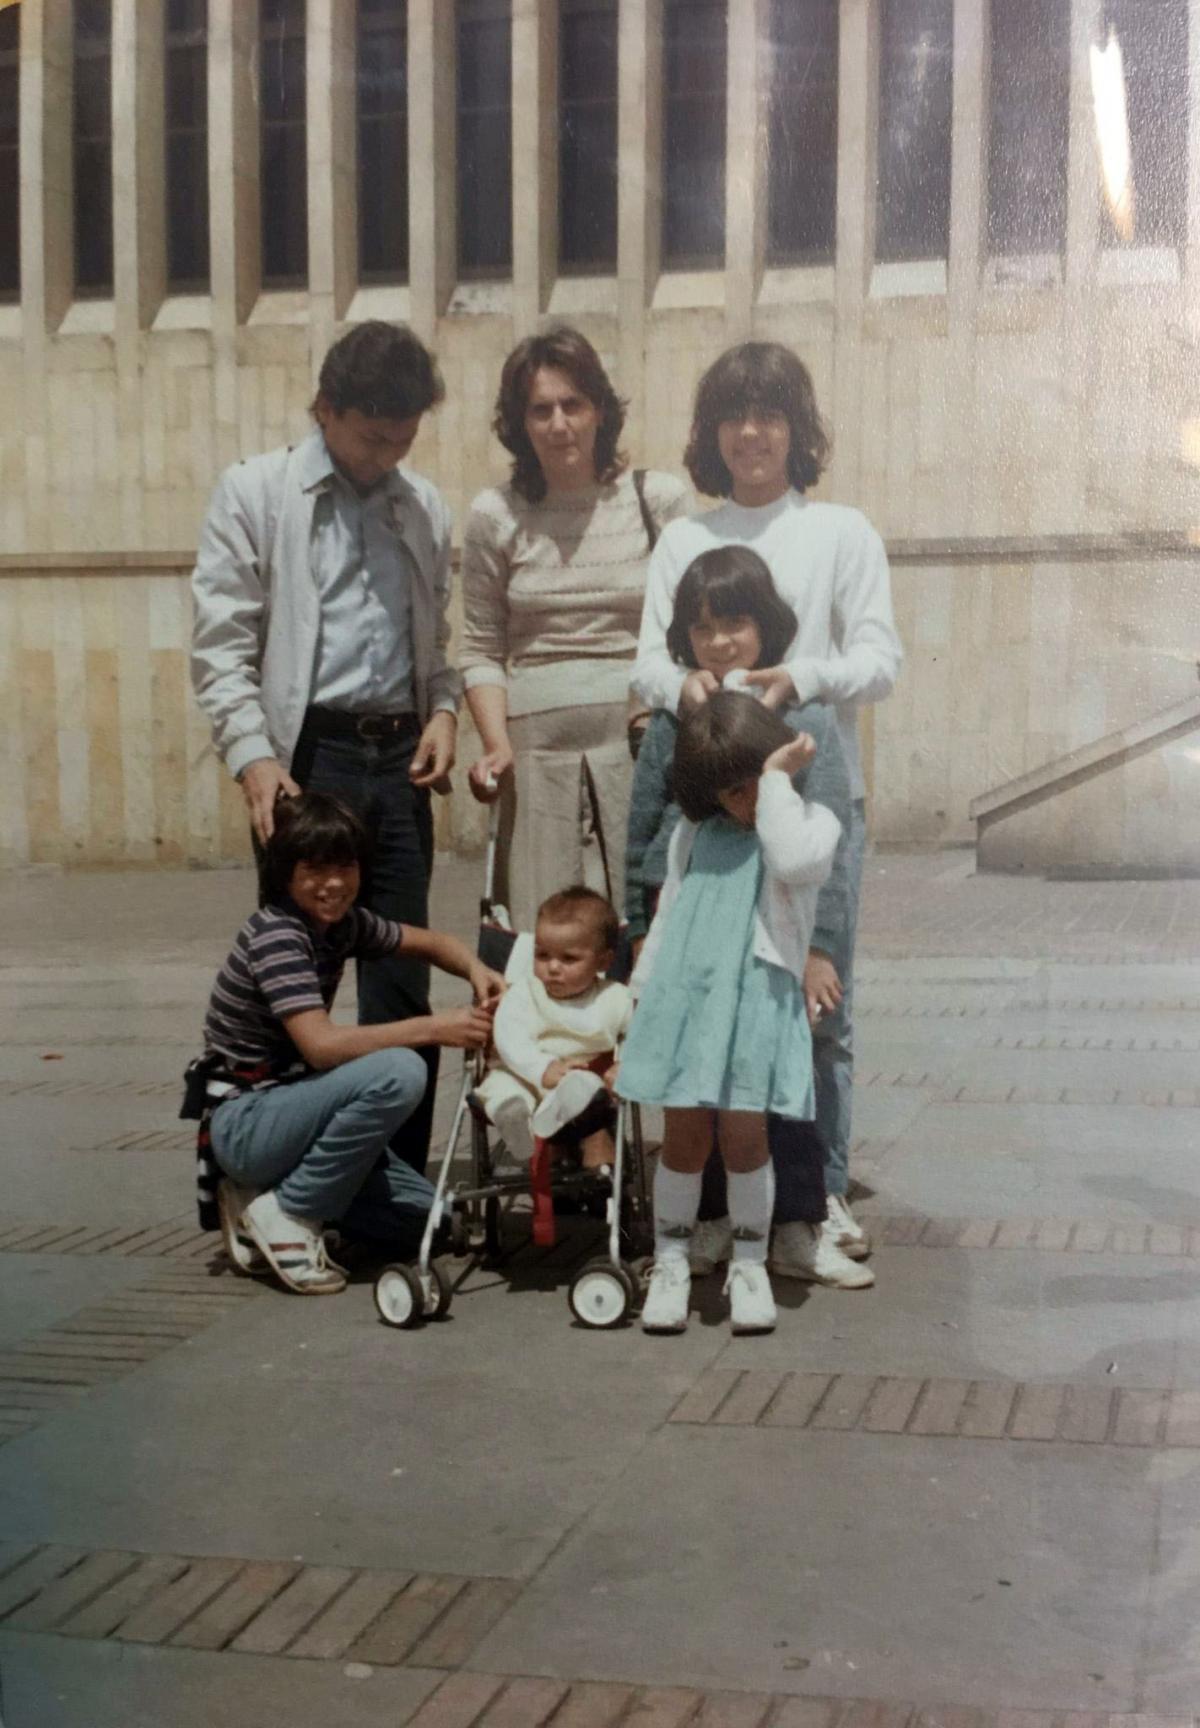 Magistrate Urán, his wife, and their children in front of the Palace of Justice